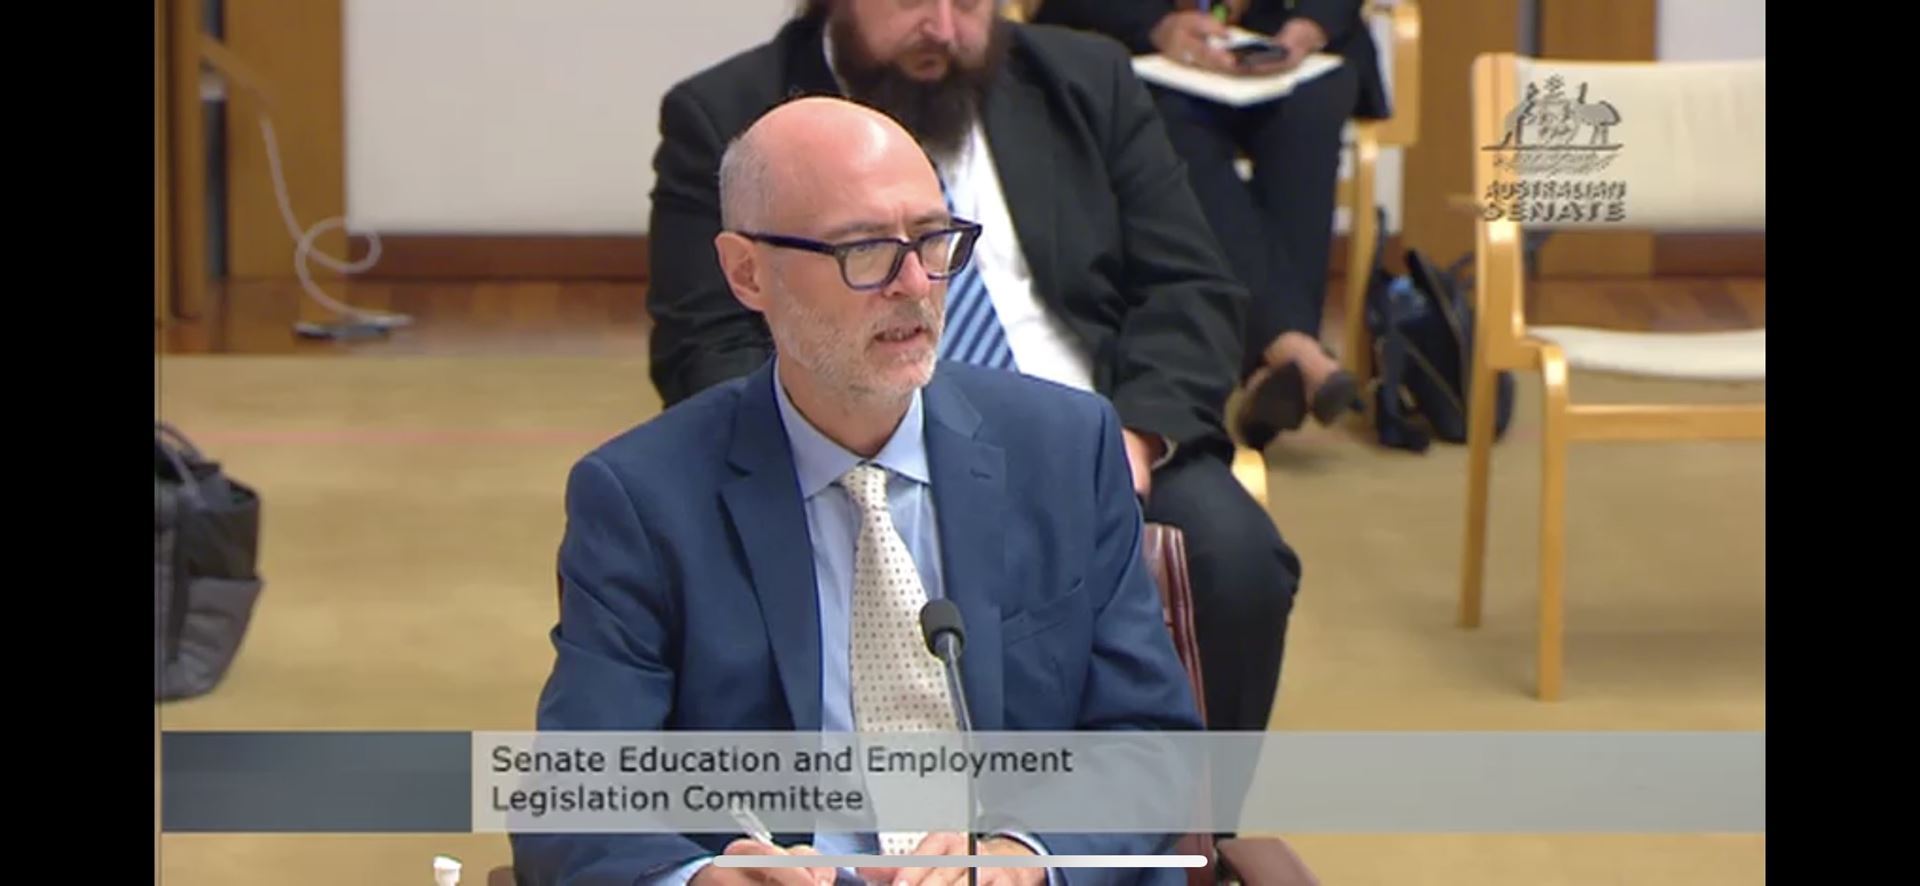 Prof Sven Rogge speaking on behalf of the AIP at the 9 March proceedings of the Senate Education and Employment Legislation Committee